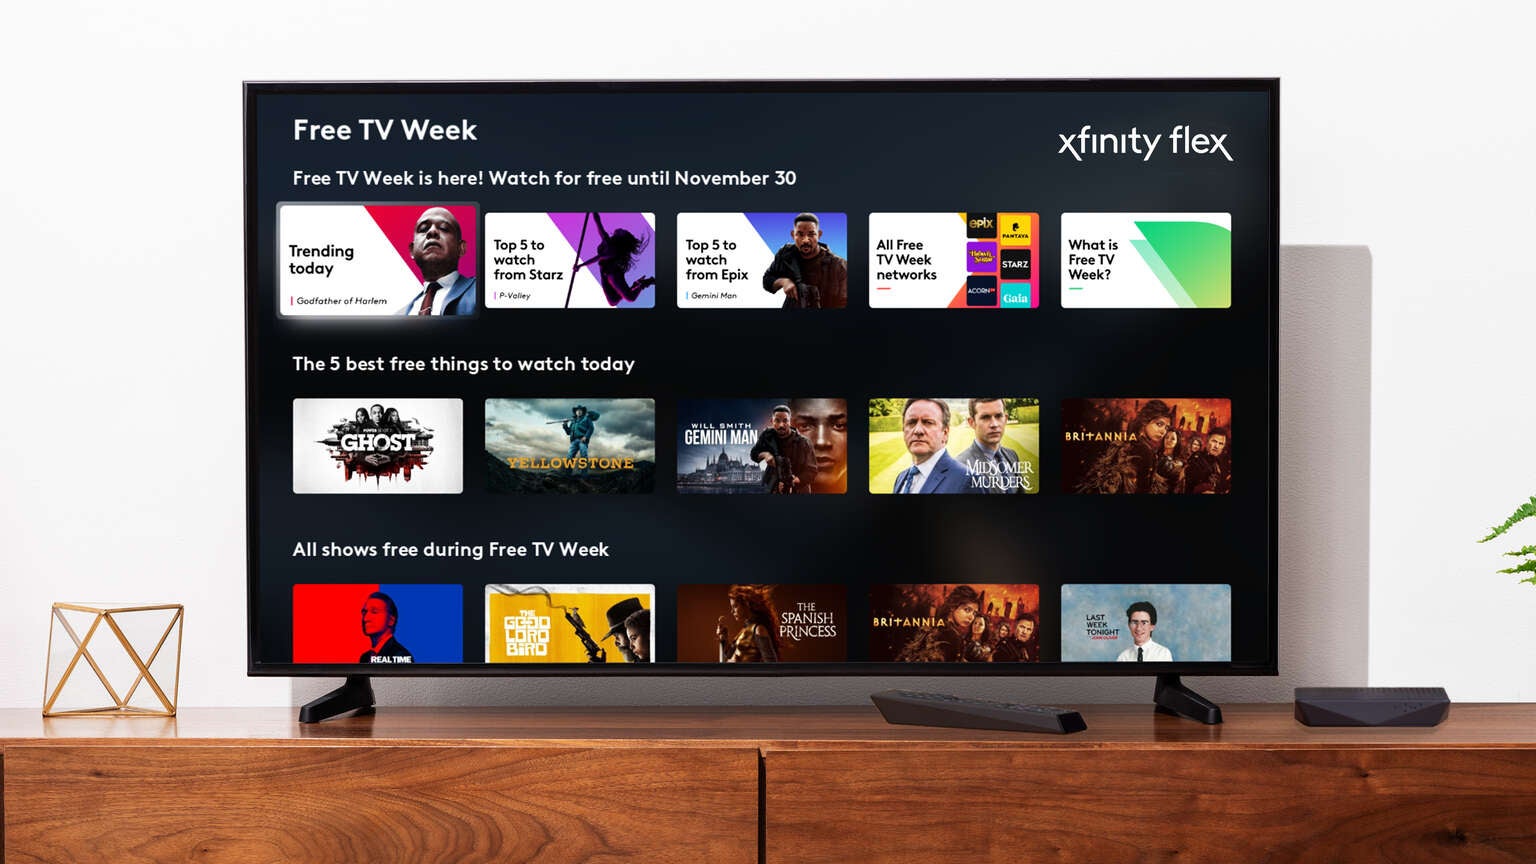 Xfinity is Offering Free TV Week for X1 and Flex Customers, Includes